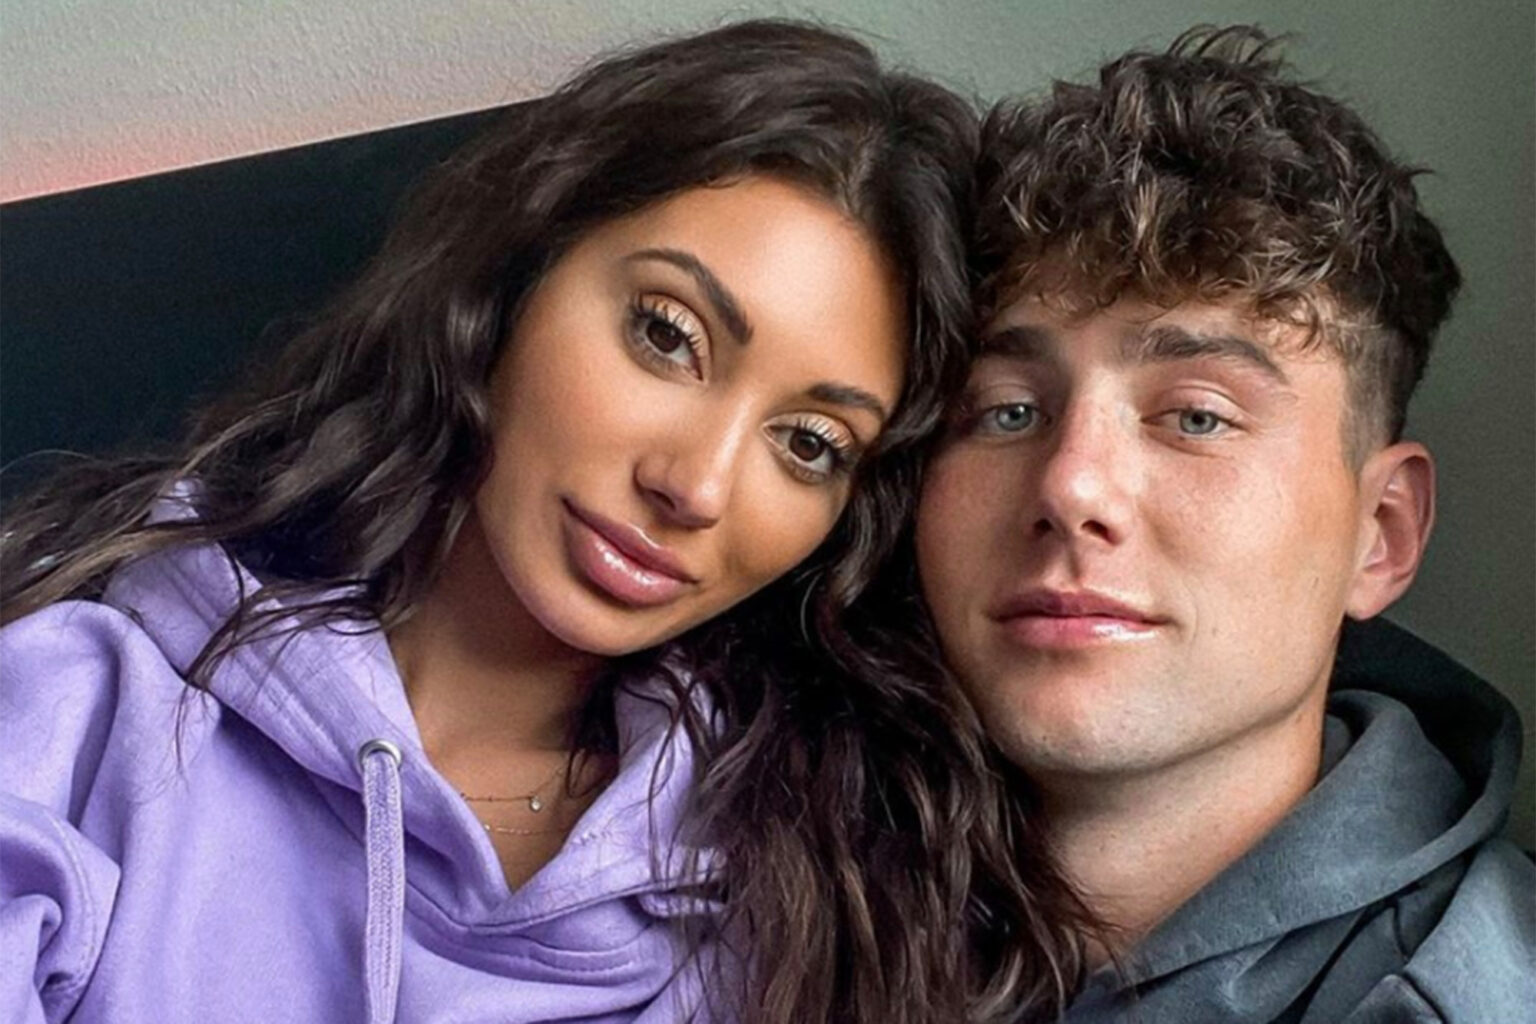 The cuddly power couple from 'Too Hot To Handle' has split. Get the latest tea on why Francesca Farago called it quits with her beau right here.